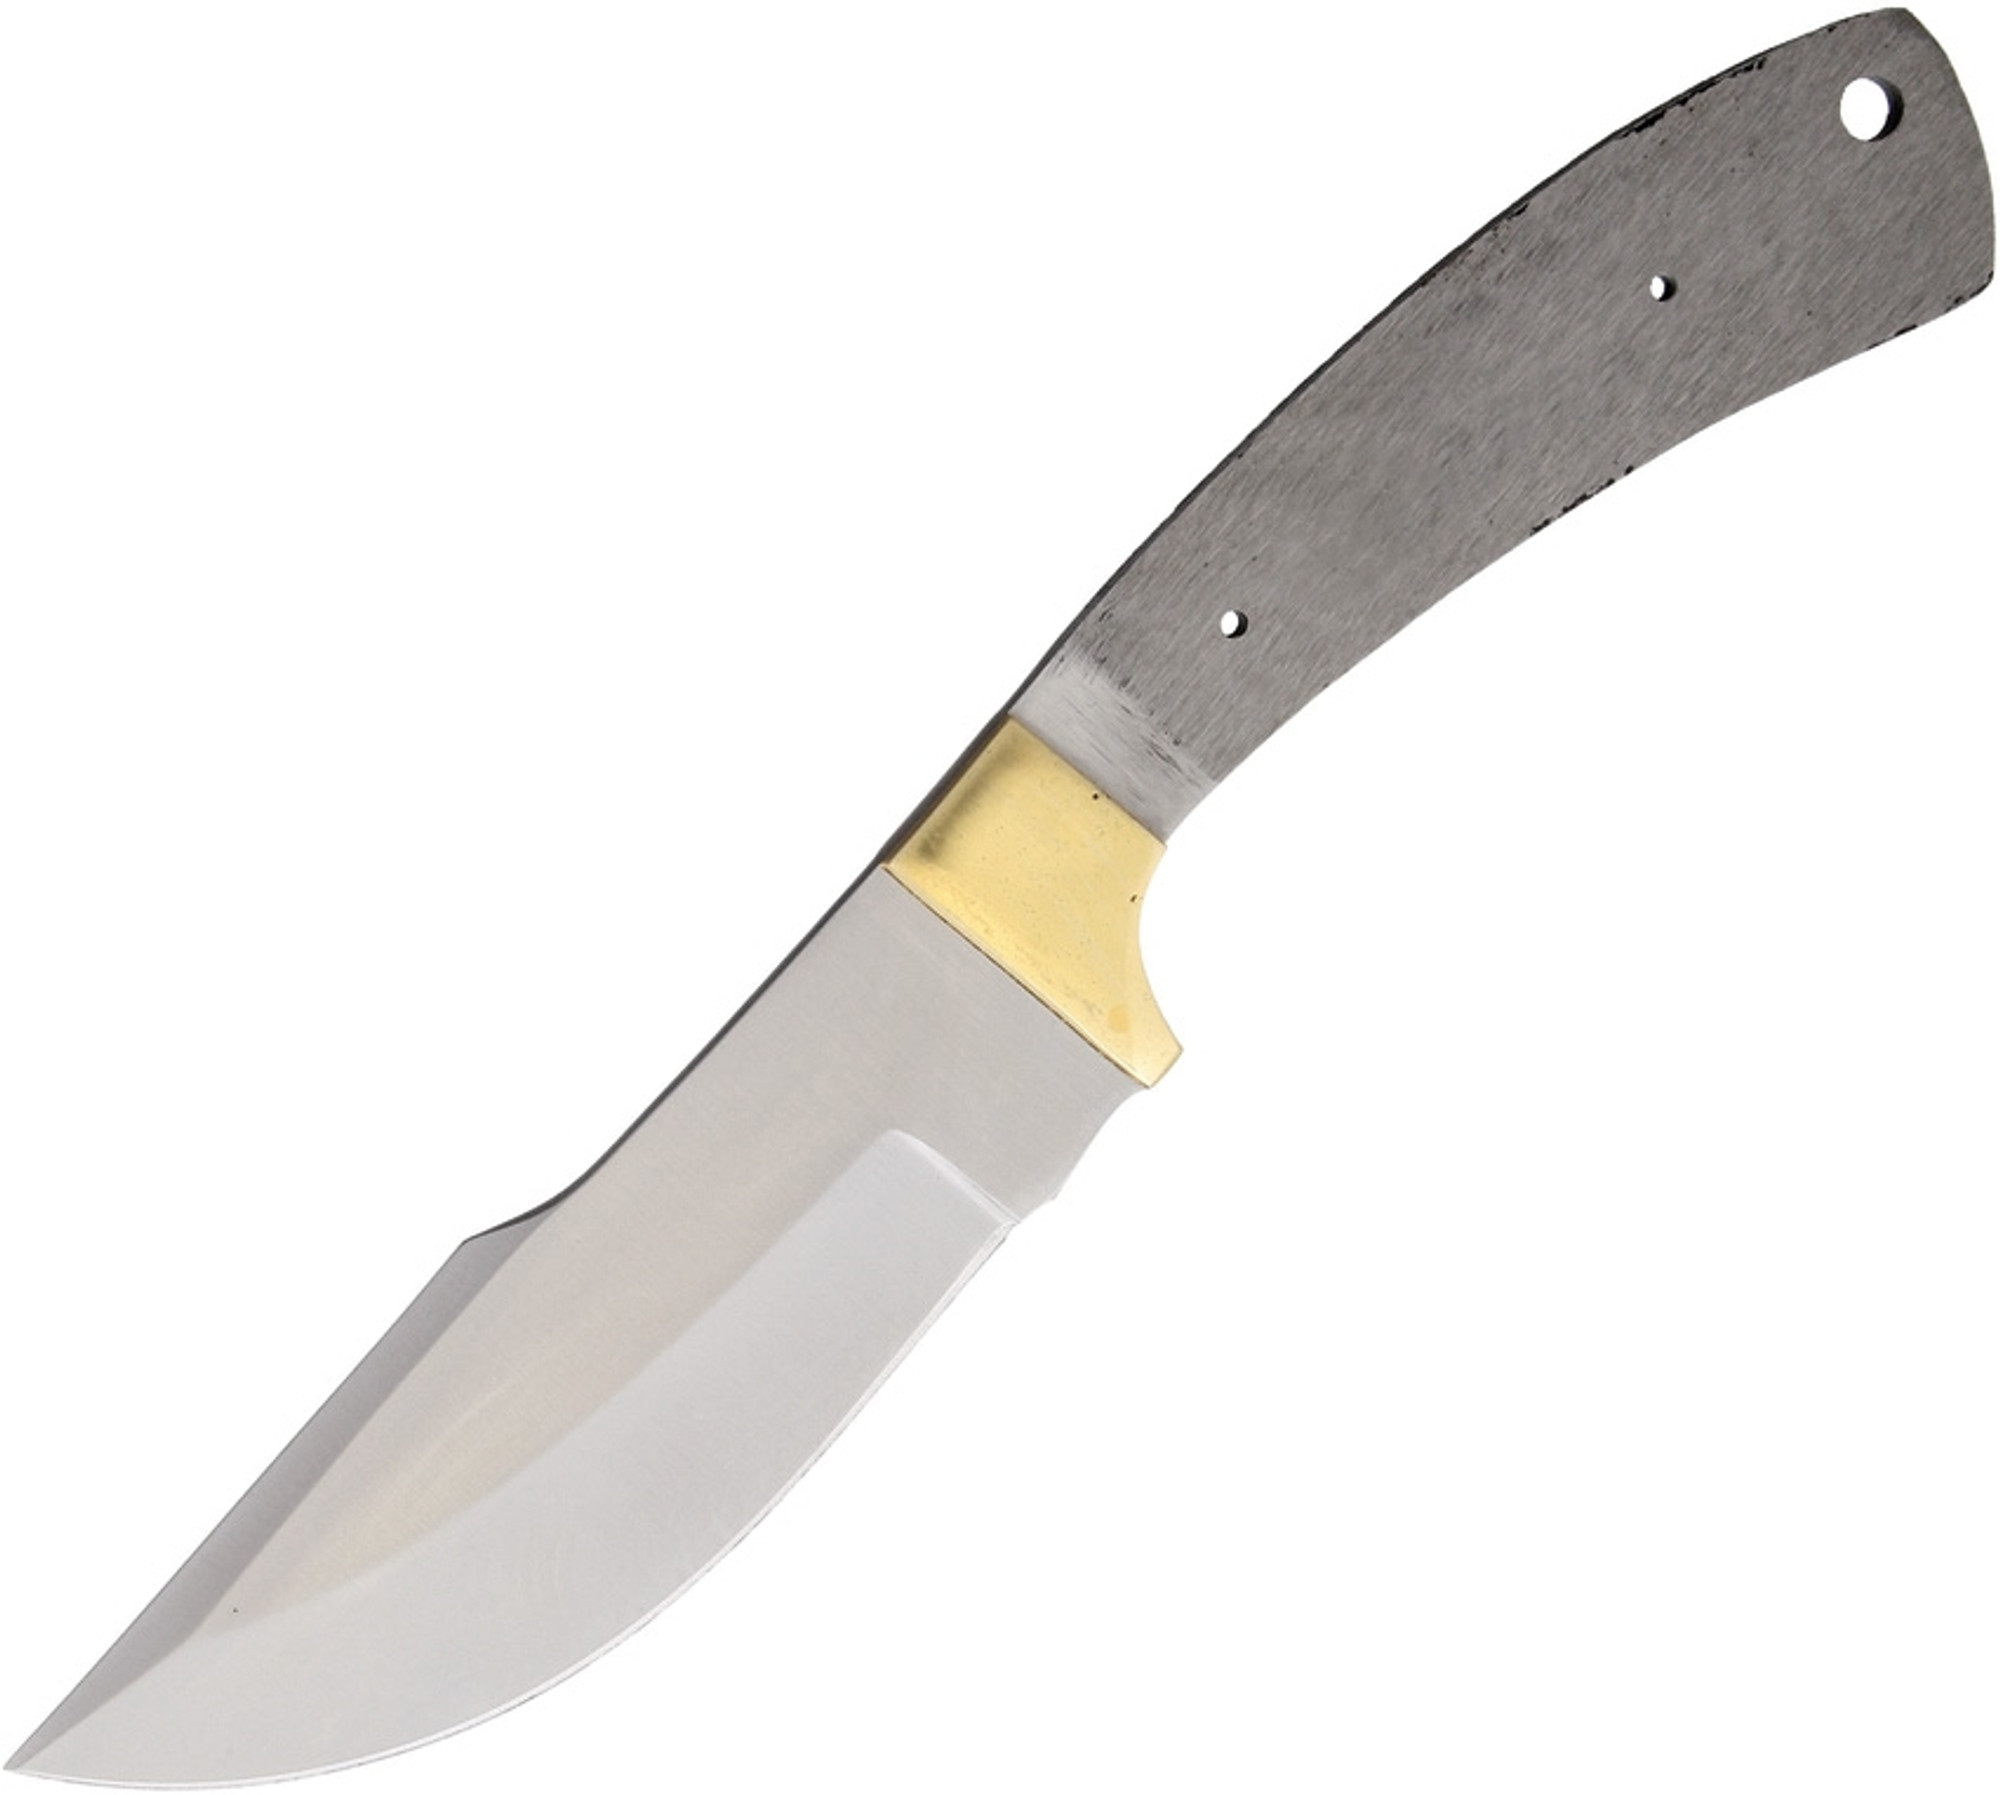 Skinner Blade With Guard